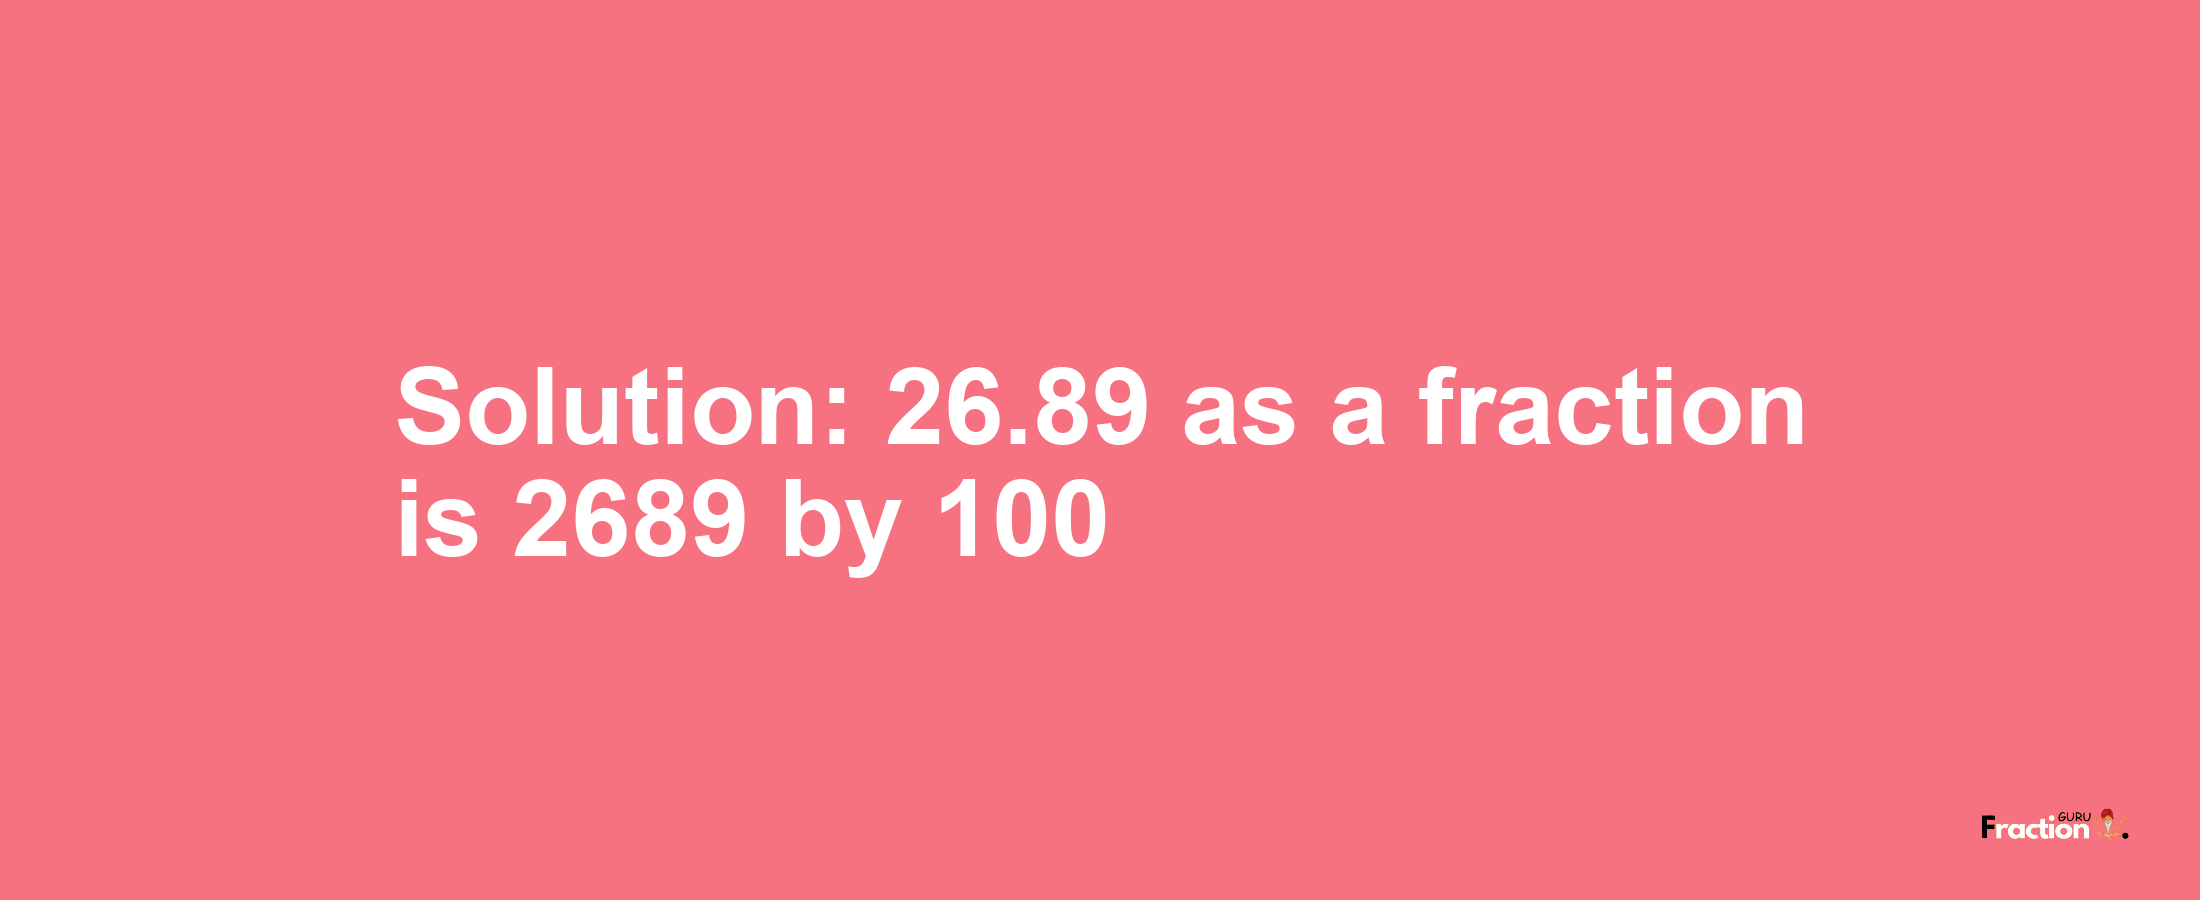 Solution:26.89 as a fraction is 2689/100